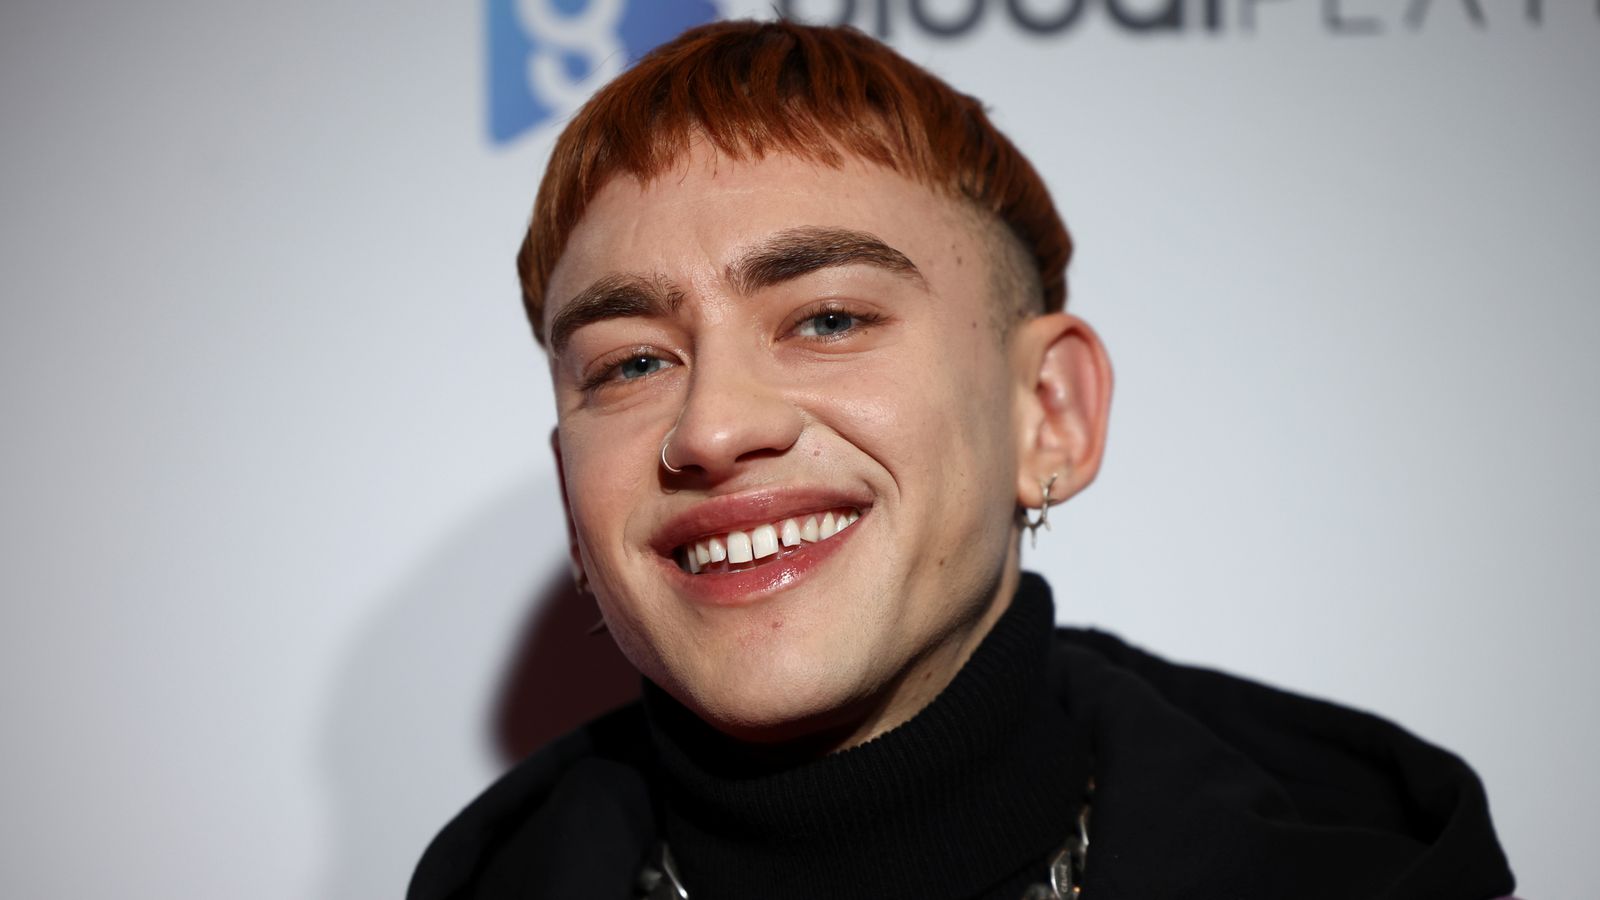 Years & Years singer Olly Alexander to represent UK at Eurovision Song Contest